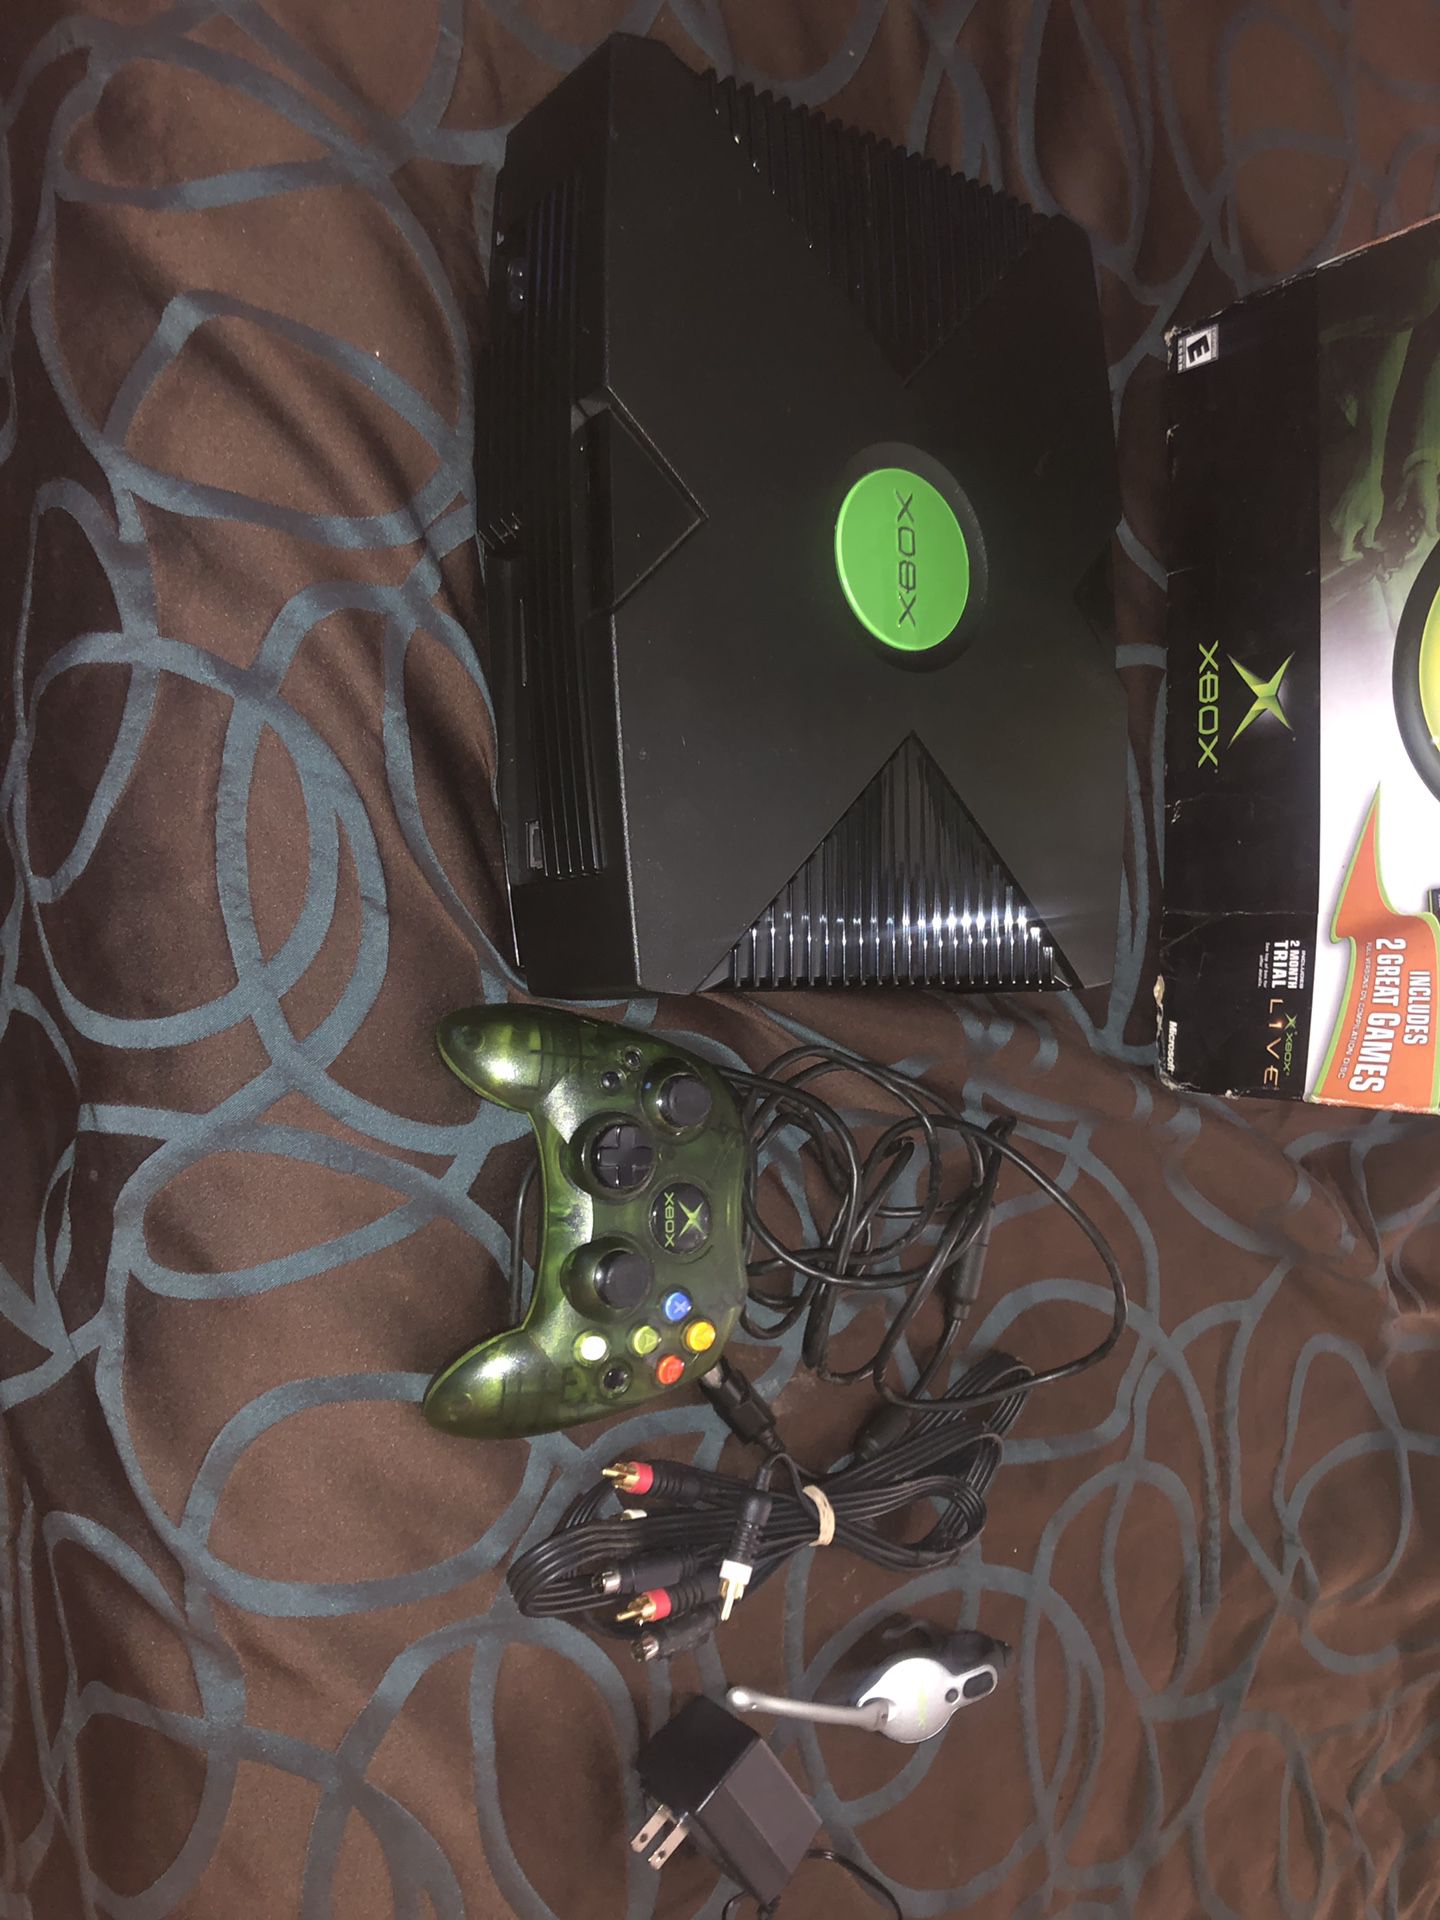 Xbox with box, cables, and controller